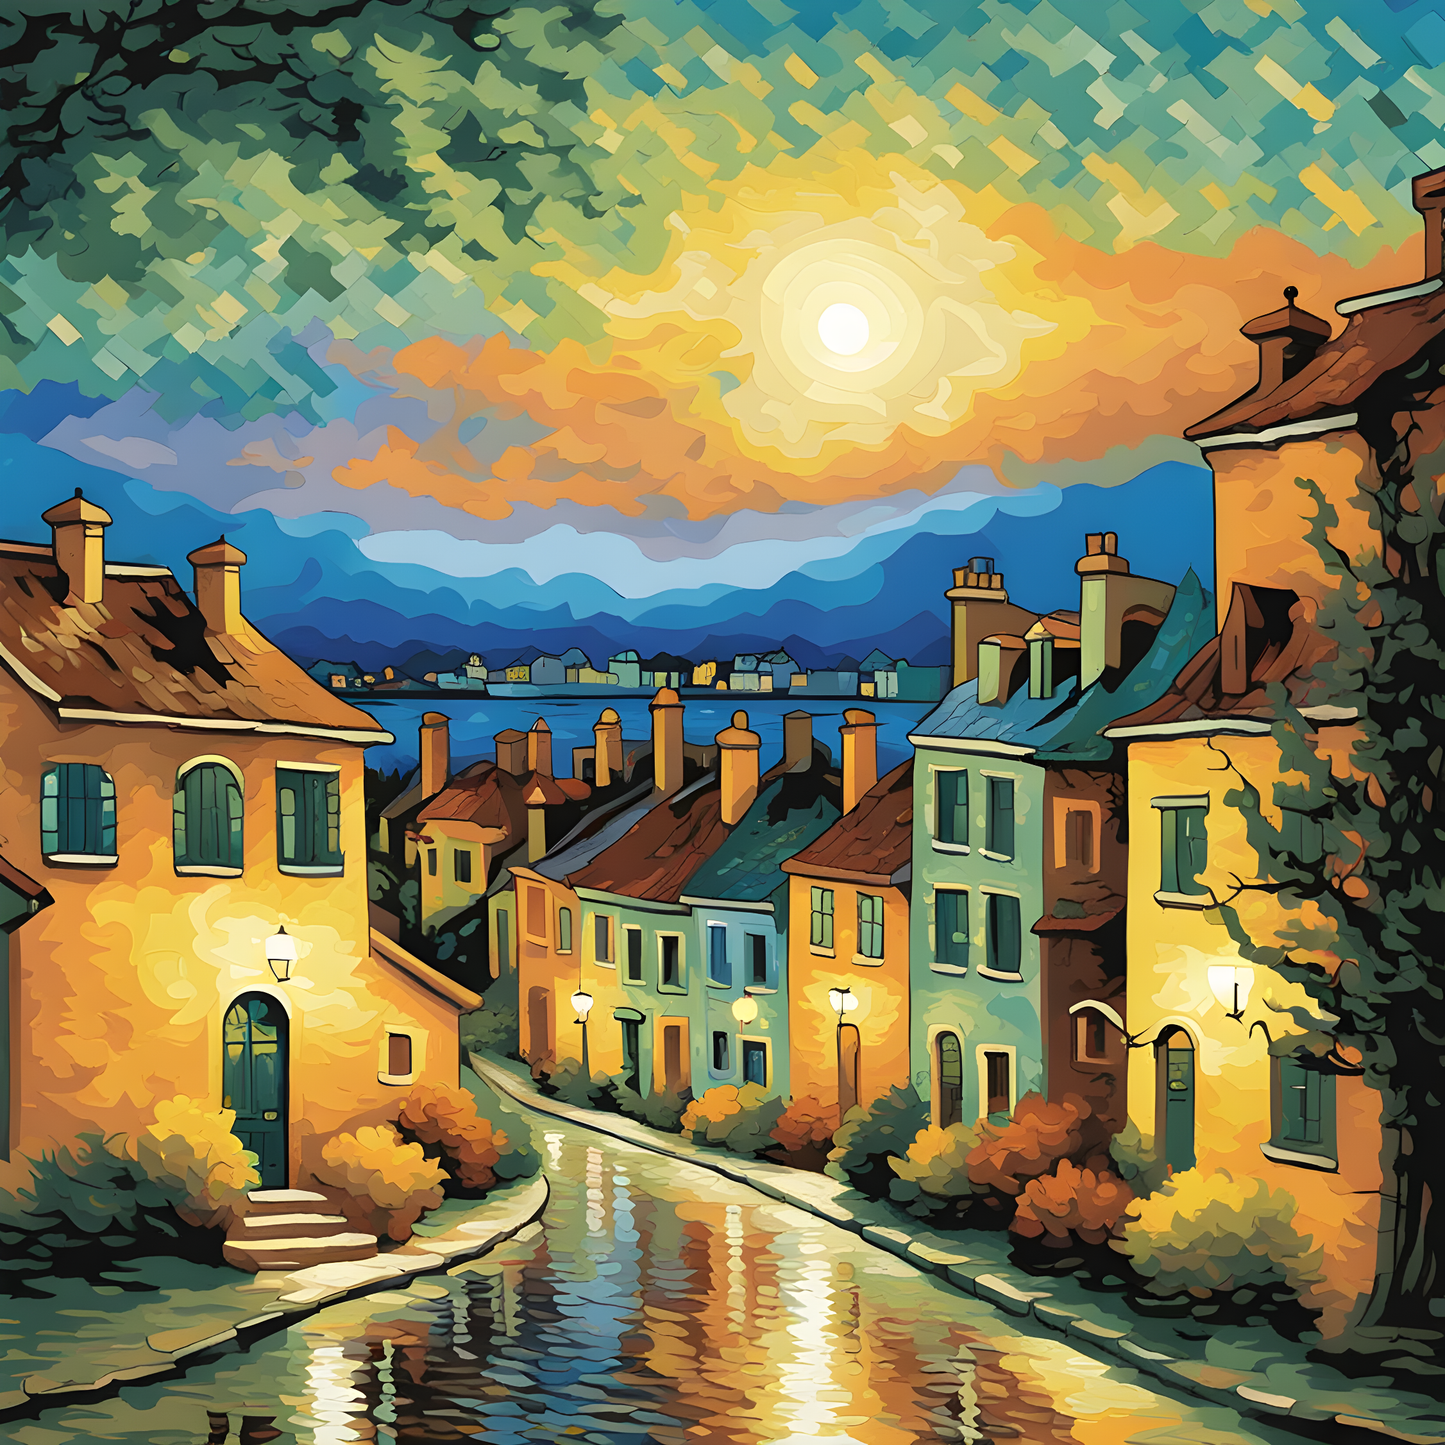 Dream Town at Twilight - Van-Go Paint-By-Number Kit